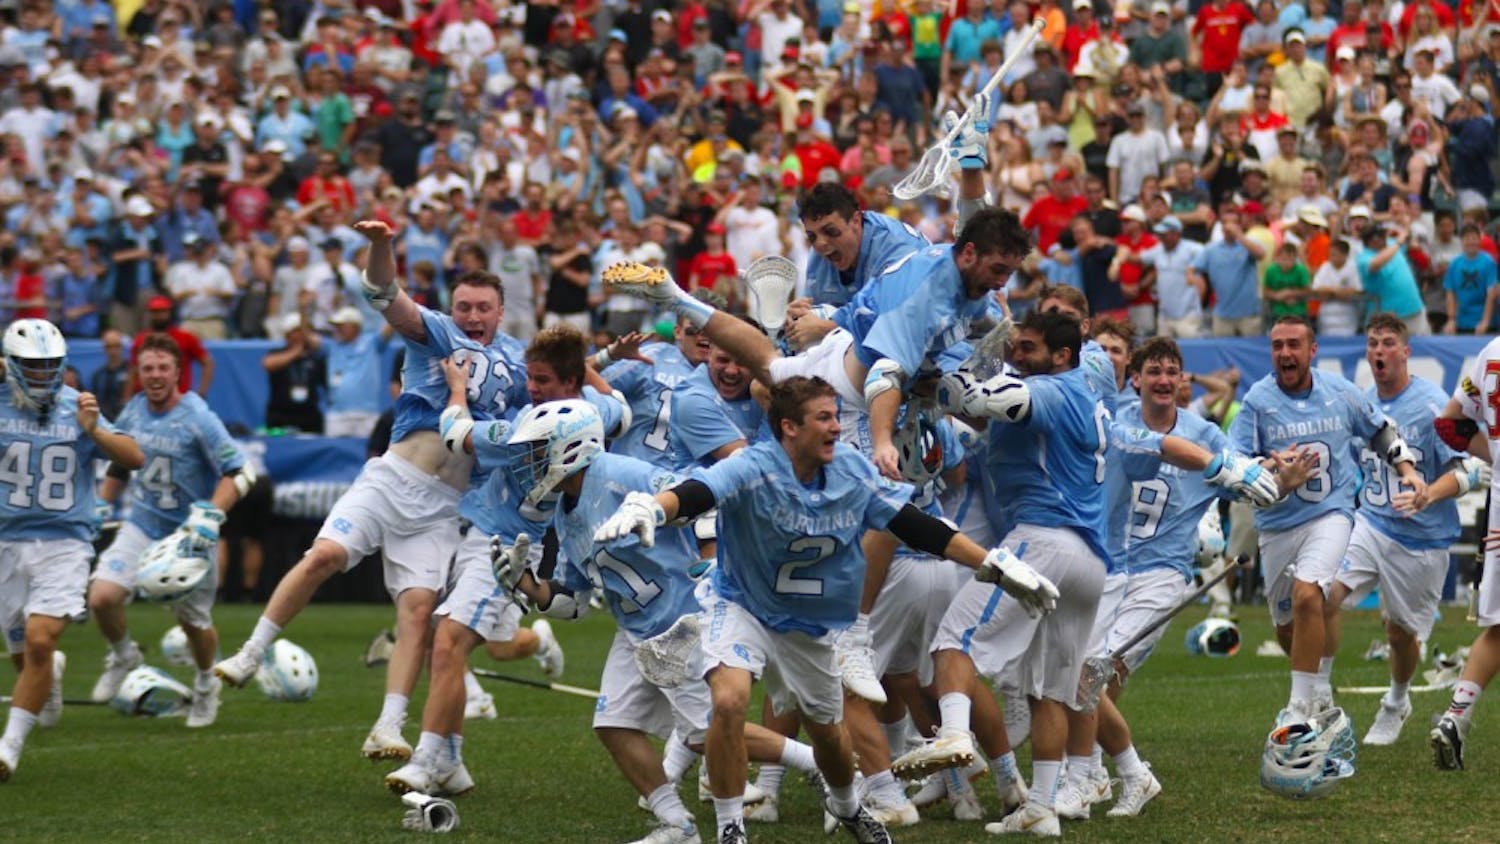 The North Carolina men's lacrosse team celebrates after defeating Maryland 14-13 in overtime to capture the program's first national championship since 1993 on Monday at Lincoln Financial Field in Philadelphia.